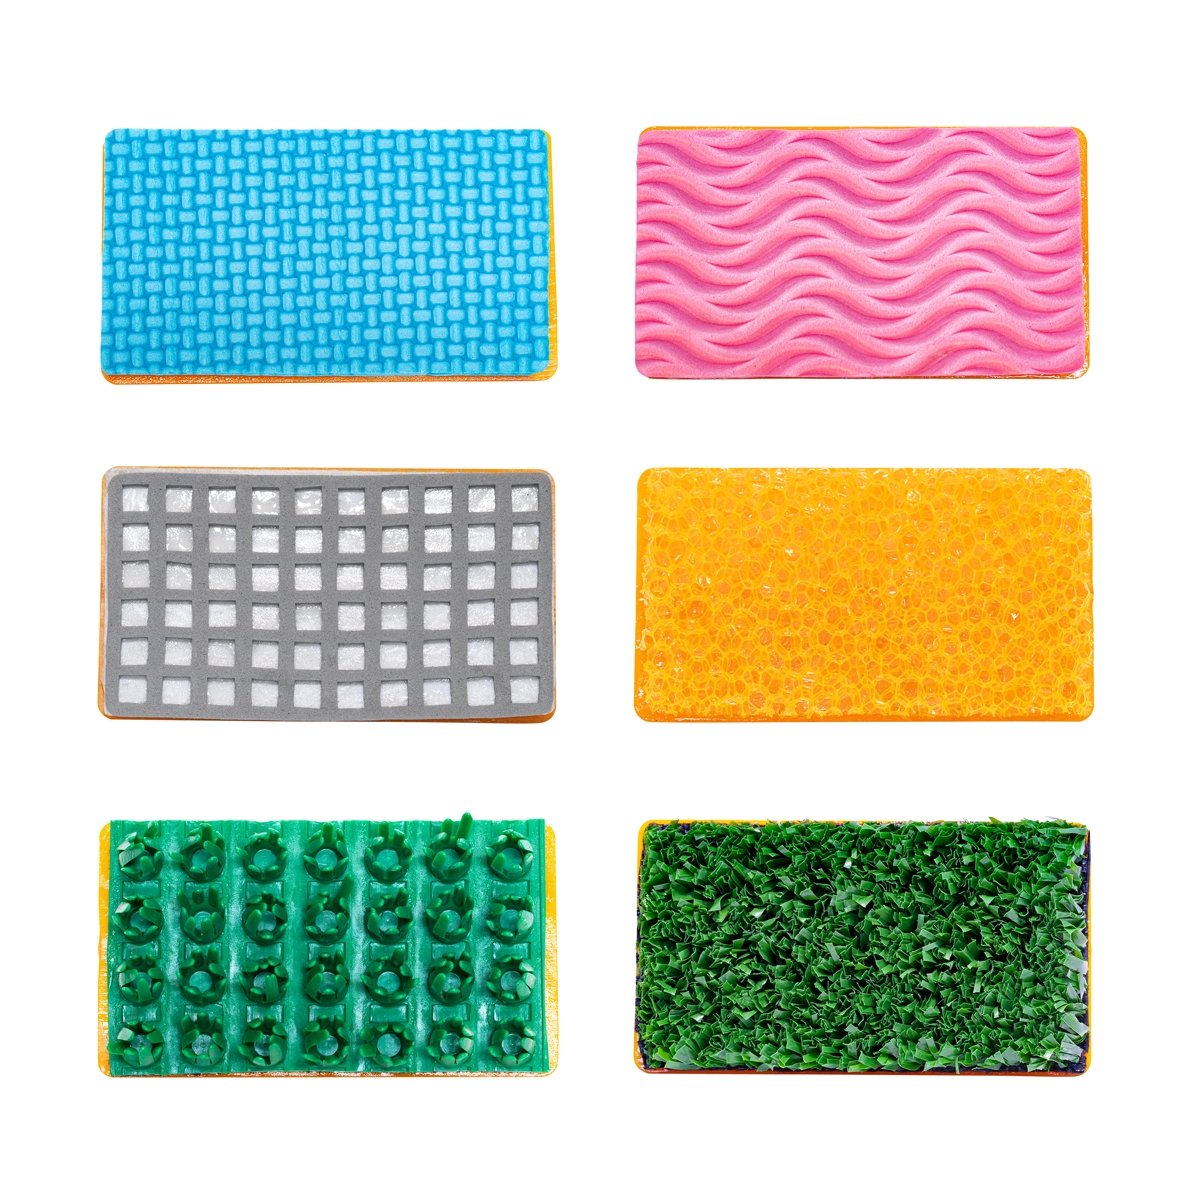 Craft Foam Rollers and Paint Tray  Craft and Classroom Supplies by Hygloss